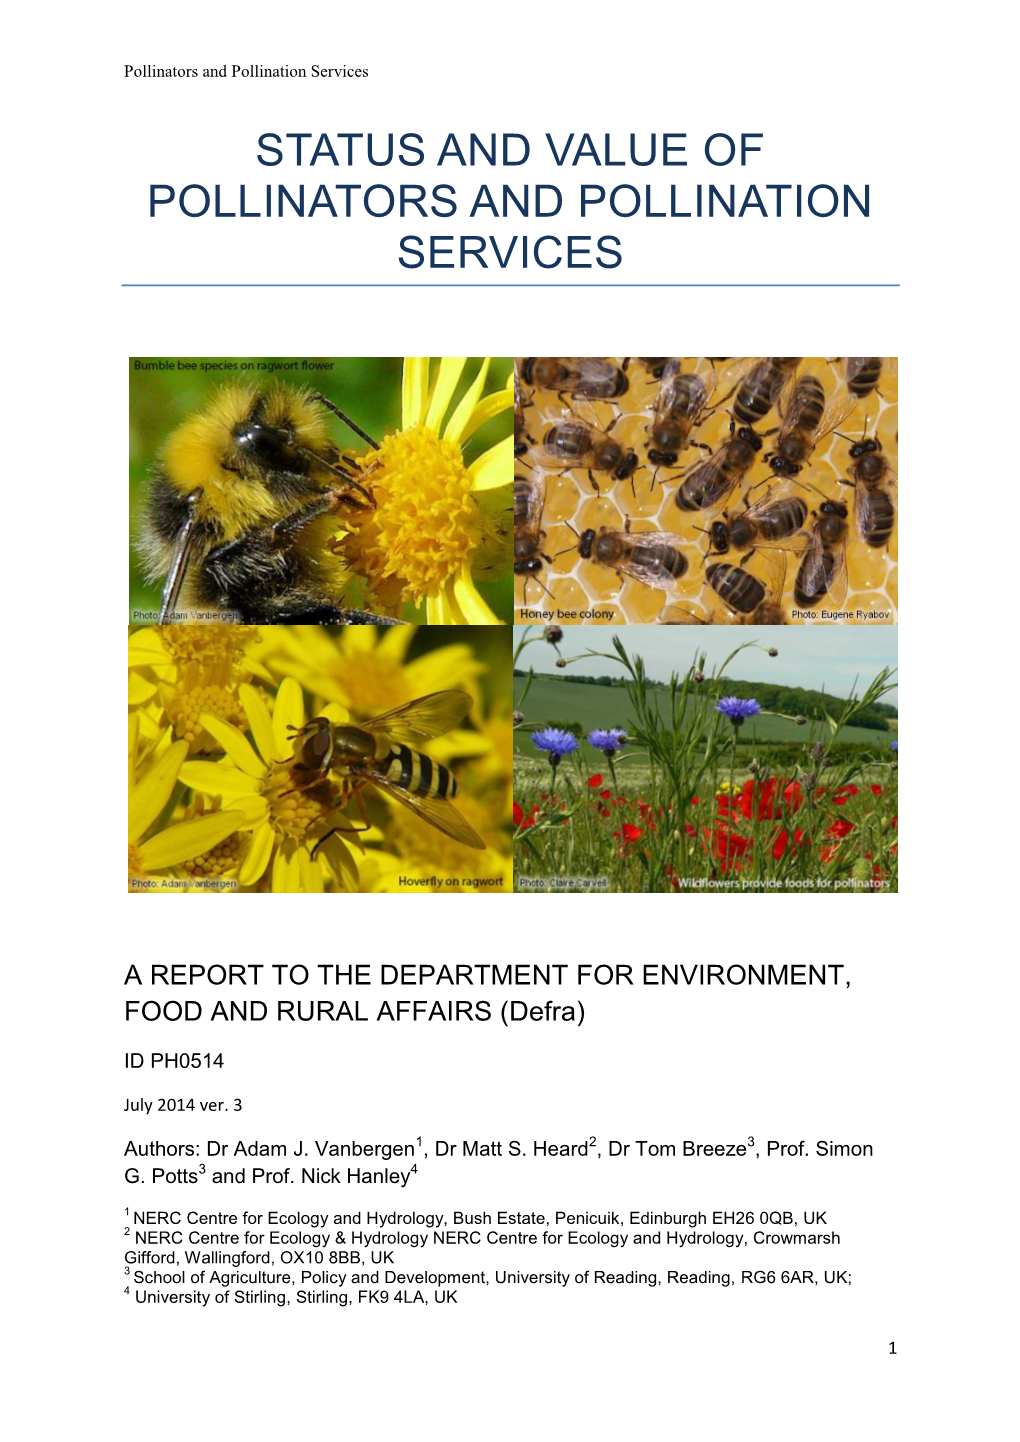 Status and Value of Pollinators and Pollination Services